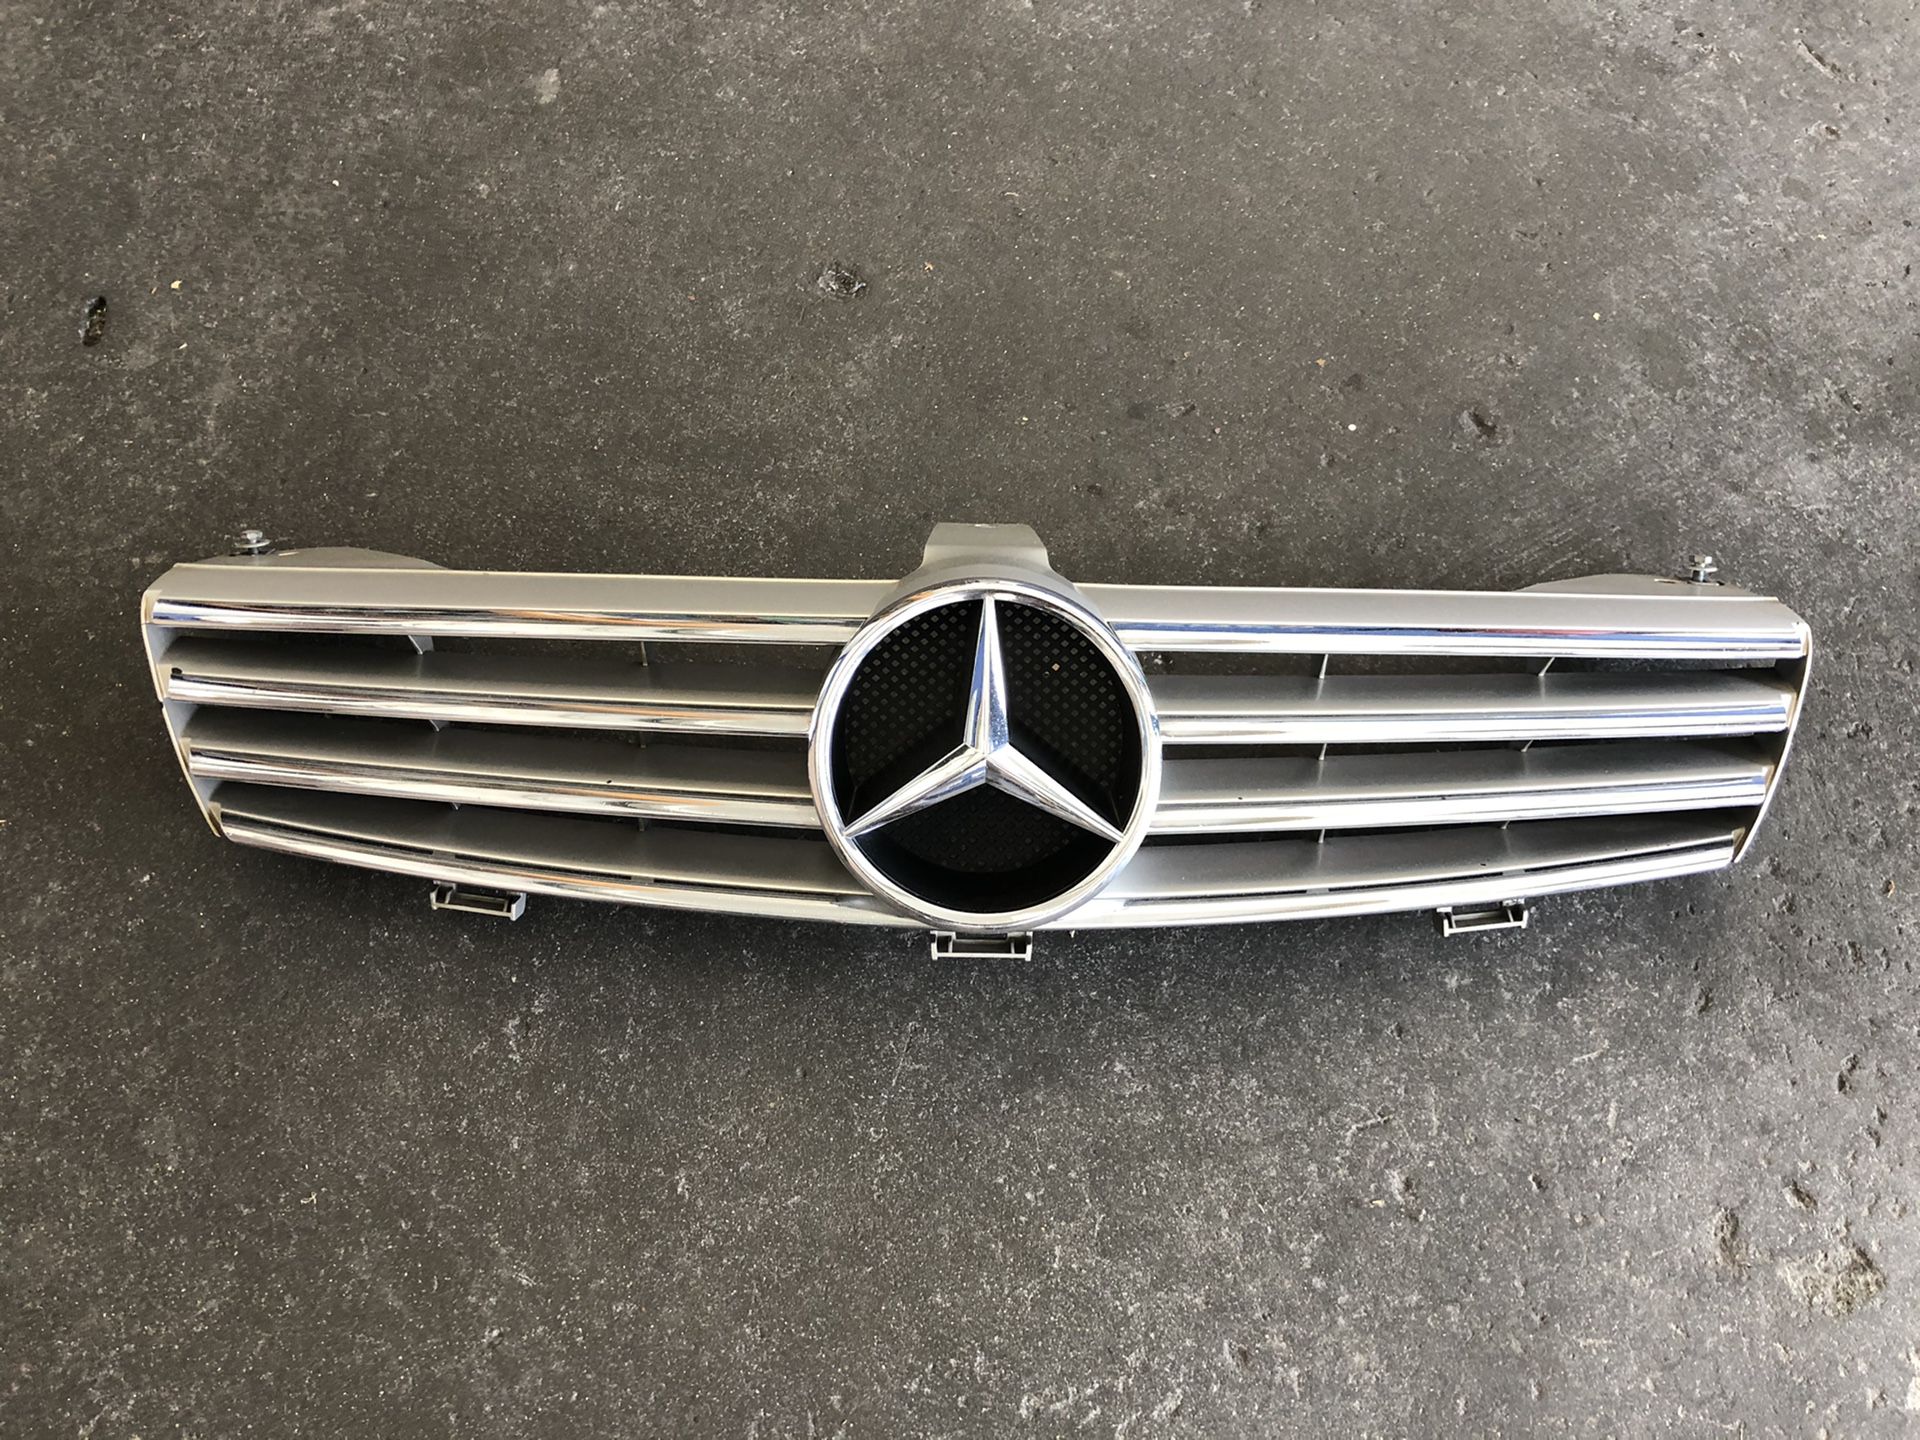 Mercedes CLS; Grill, Fog lights and Air bag